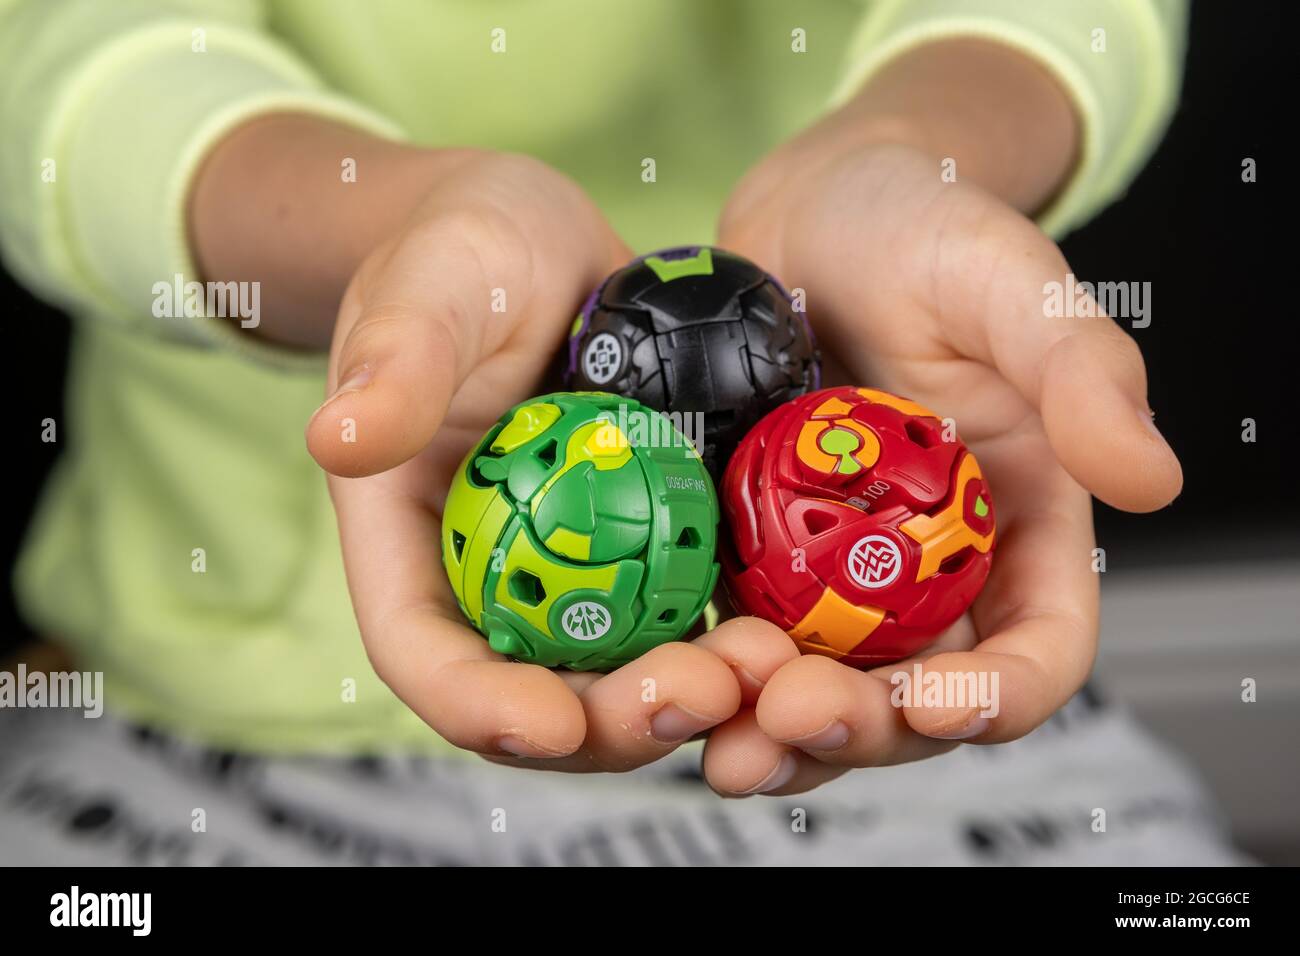 Bakugan Ball toys. New popular transformer toy assembled in ball shape, hold in child's hands. Stafford, United Kingdom, August 8, 2021 Stock Photo